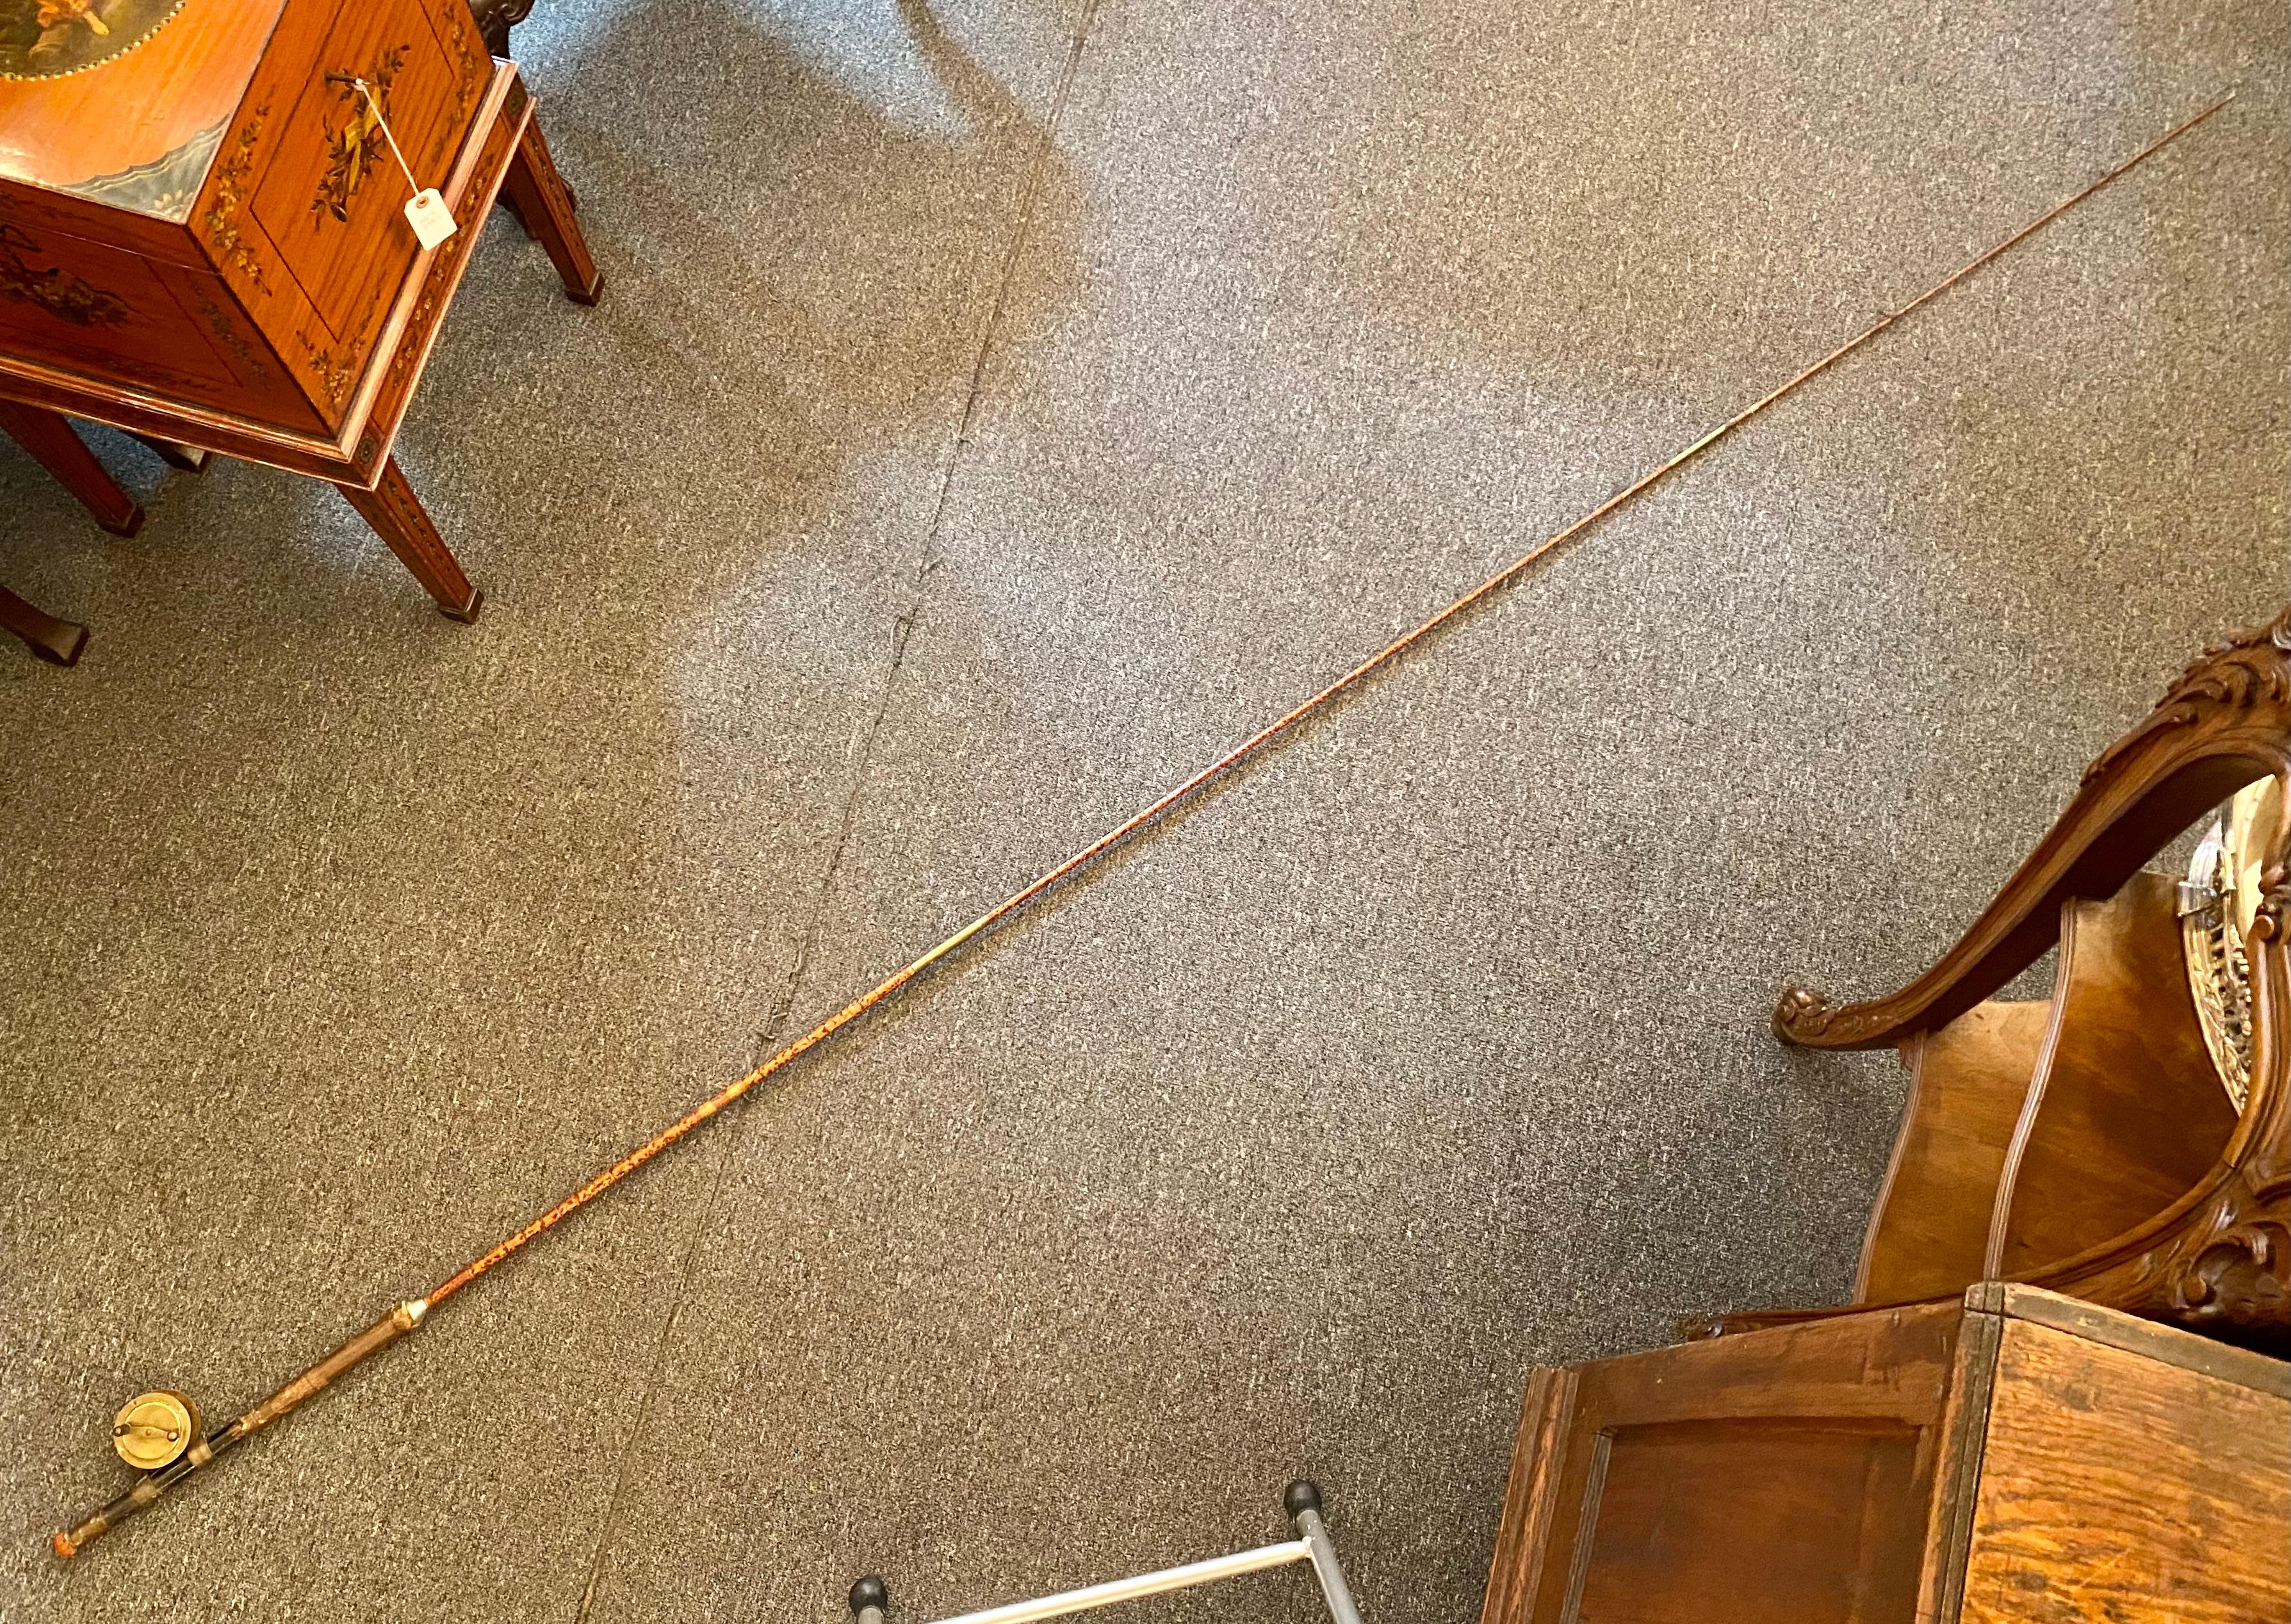 Antique English bamboo fly fishing rod with reel, Circa 1920's. The fishing rod comes apart in 3 pieces.
Overall: 114